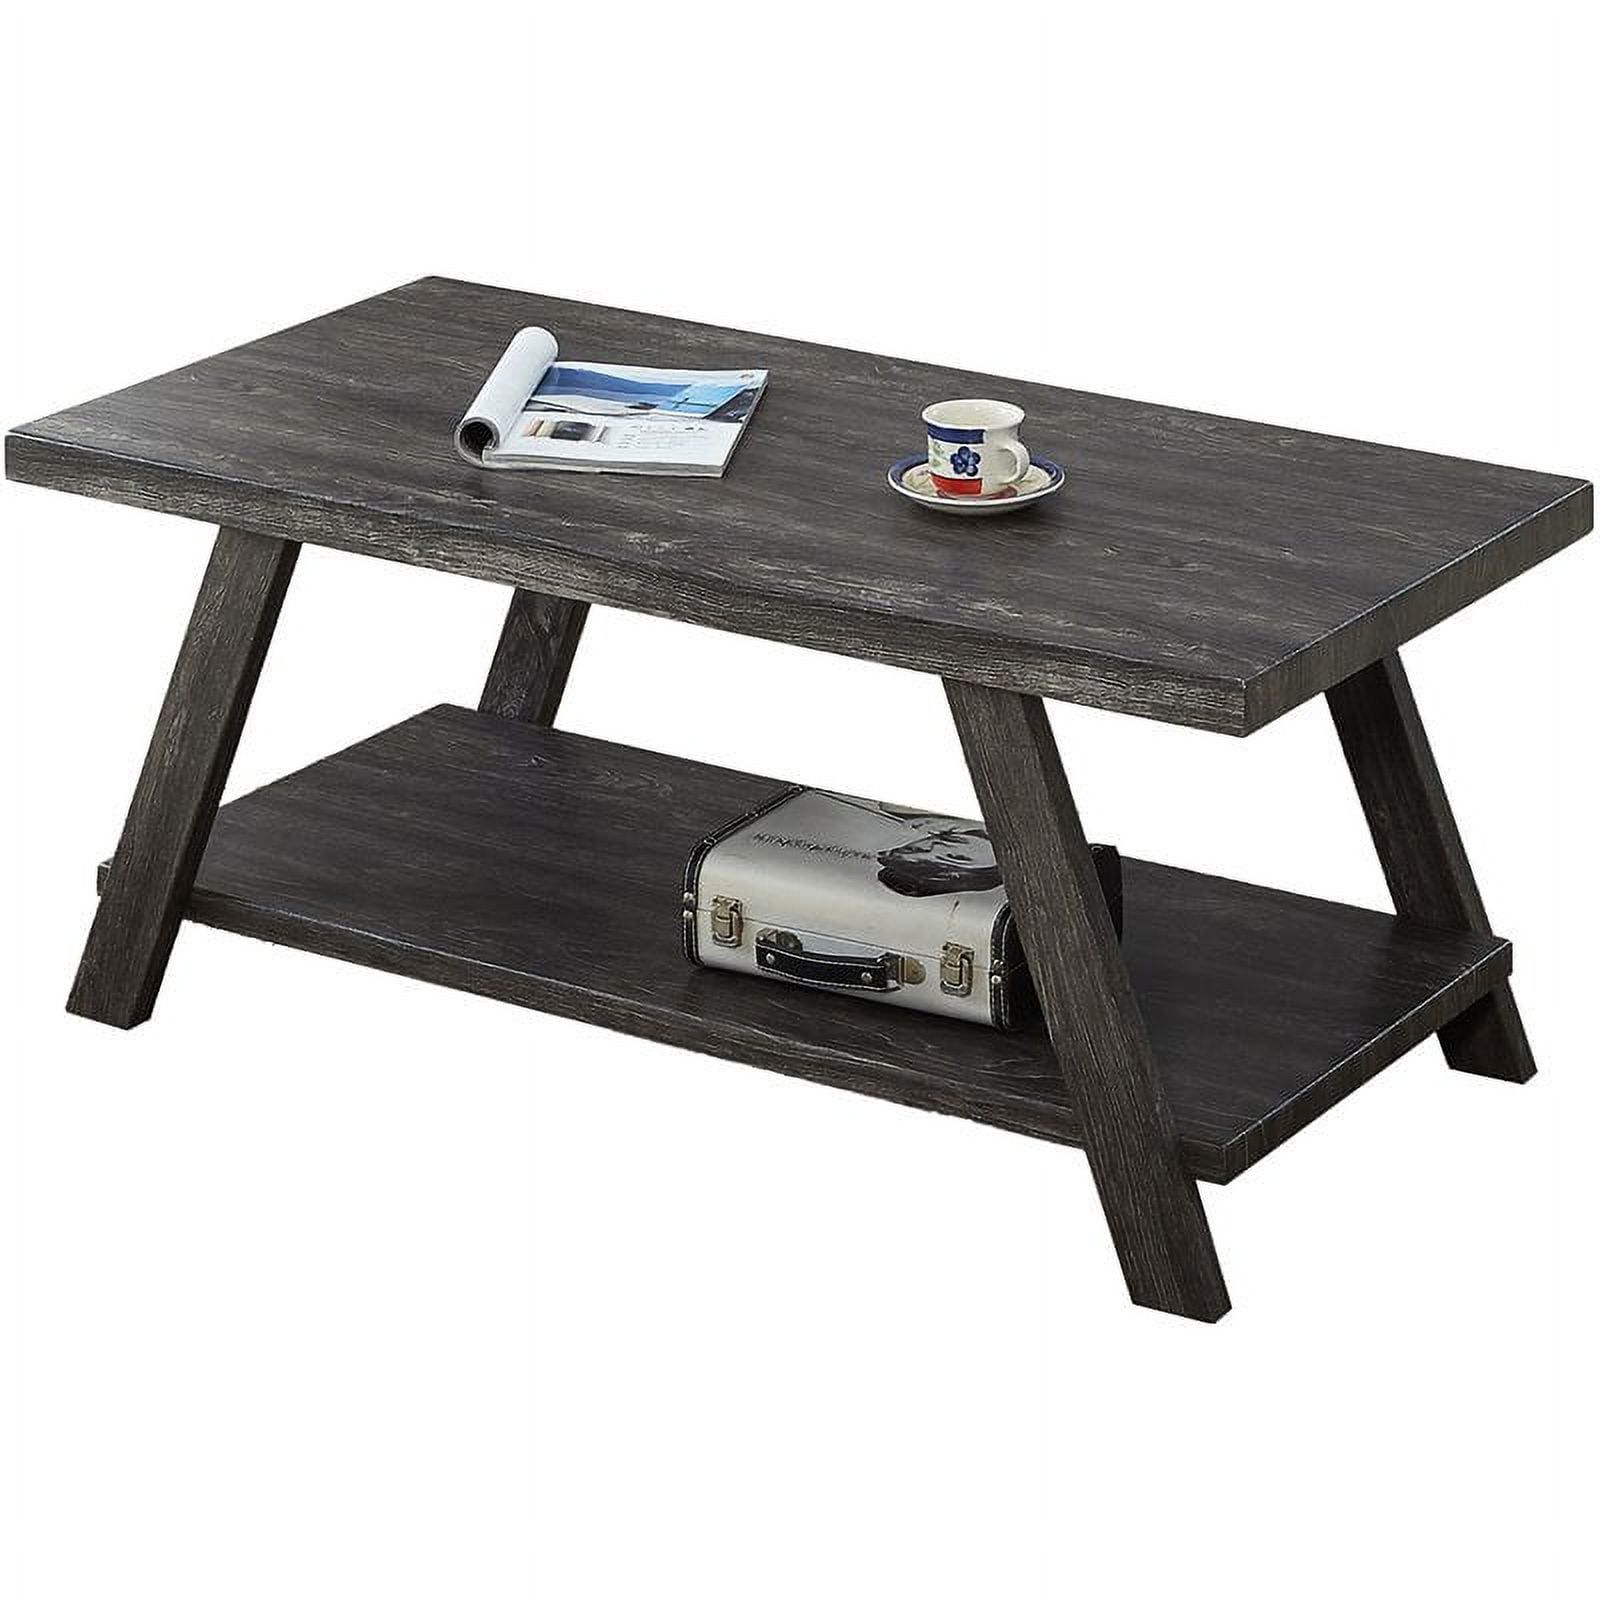 Pemberly Row Replicated Wood Coffee Table In Charcoal Finish – Walmart Pertaining To Pemberly Row Replicated Wood Coffee Tables (Photo 1 of 11)